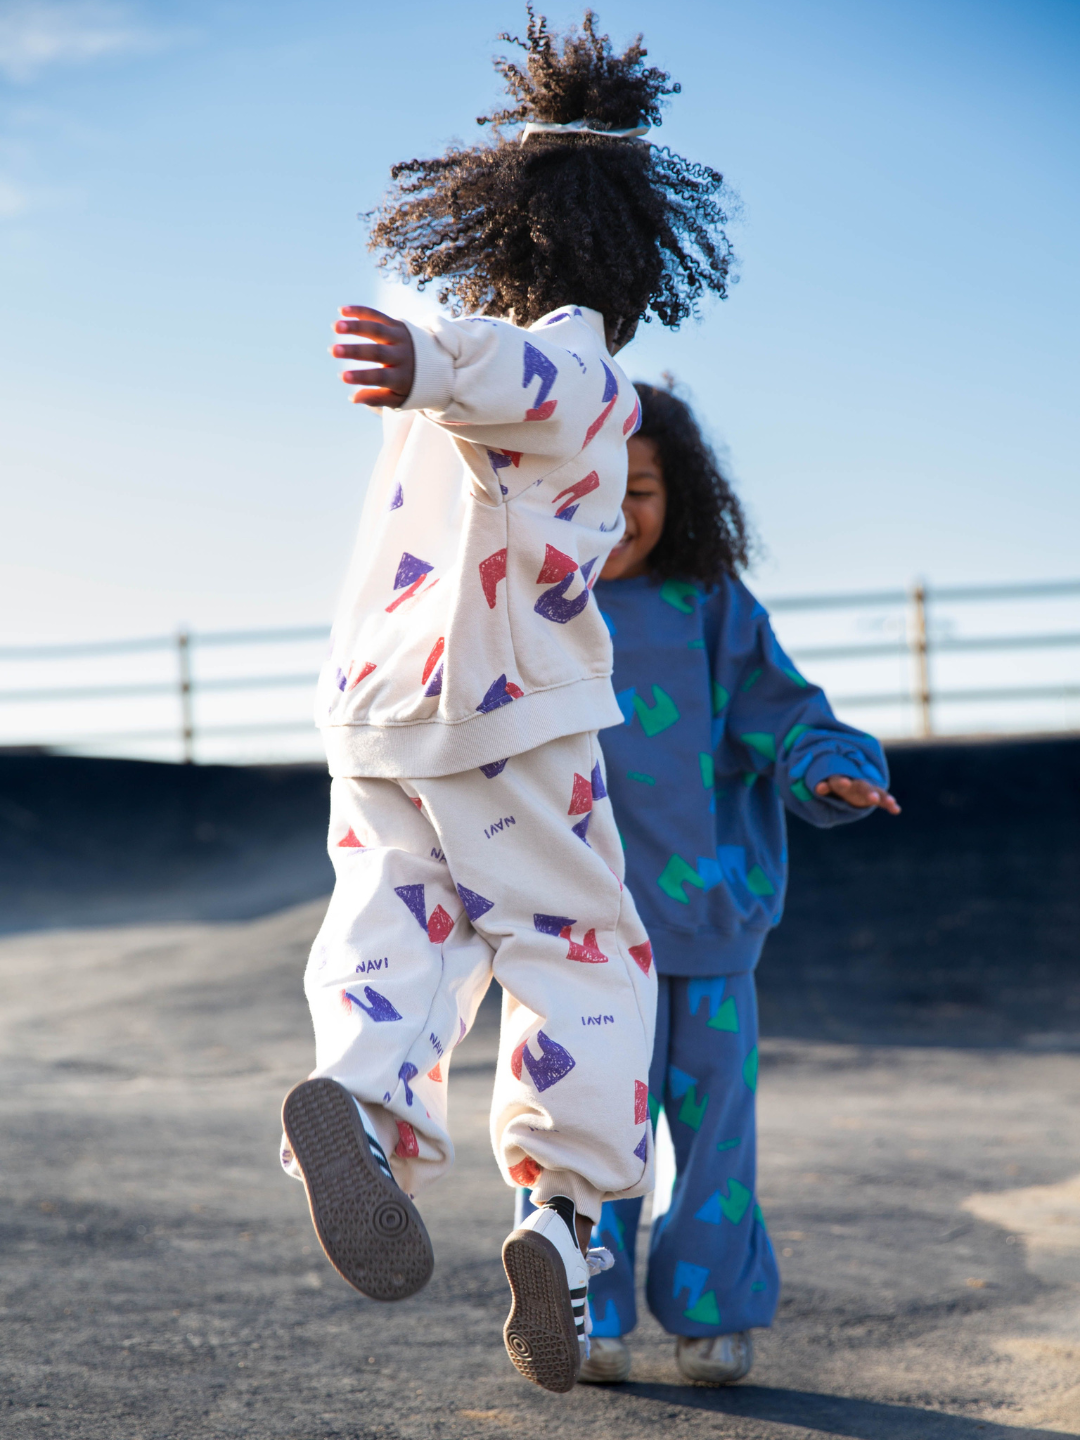 Child wearing beige sweatpants with an all over pattern of red and purple shapes and the brand name Navi, with matching crewneck sweatshirt. She is jumping facing away from camera, at an outdoor skate park with blue sky. Another child is behind her in the same outfit in blue.